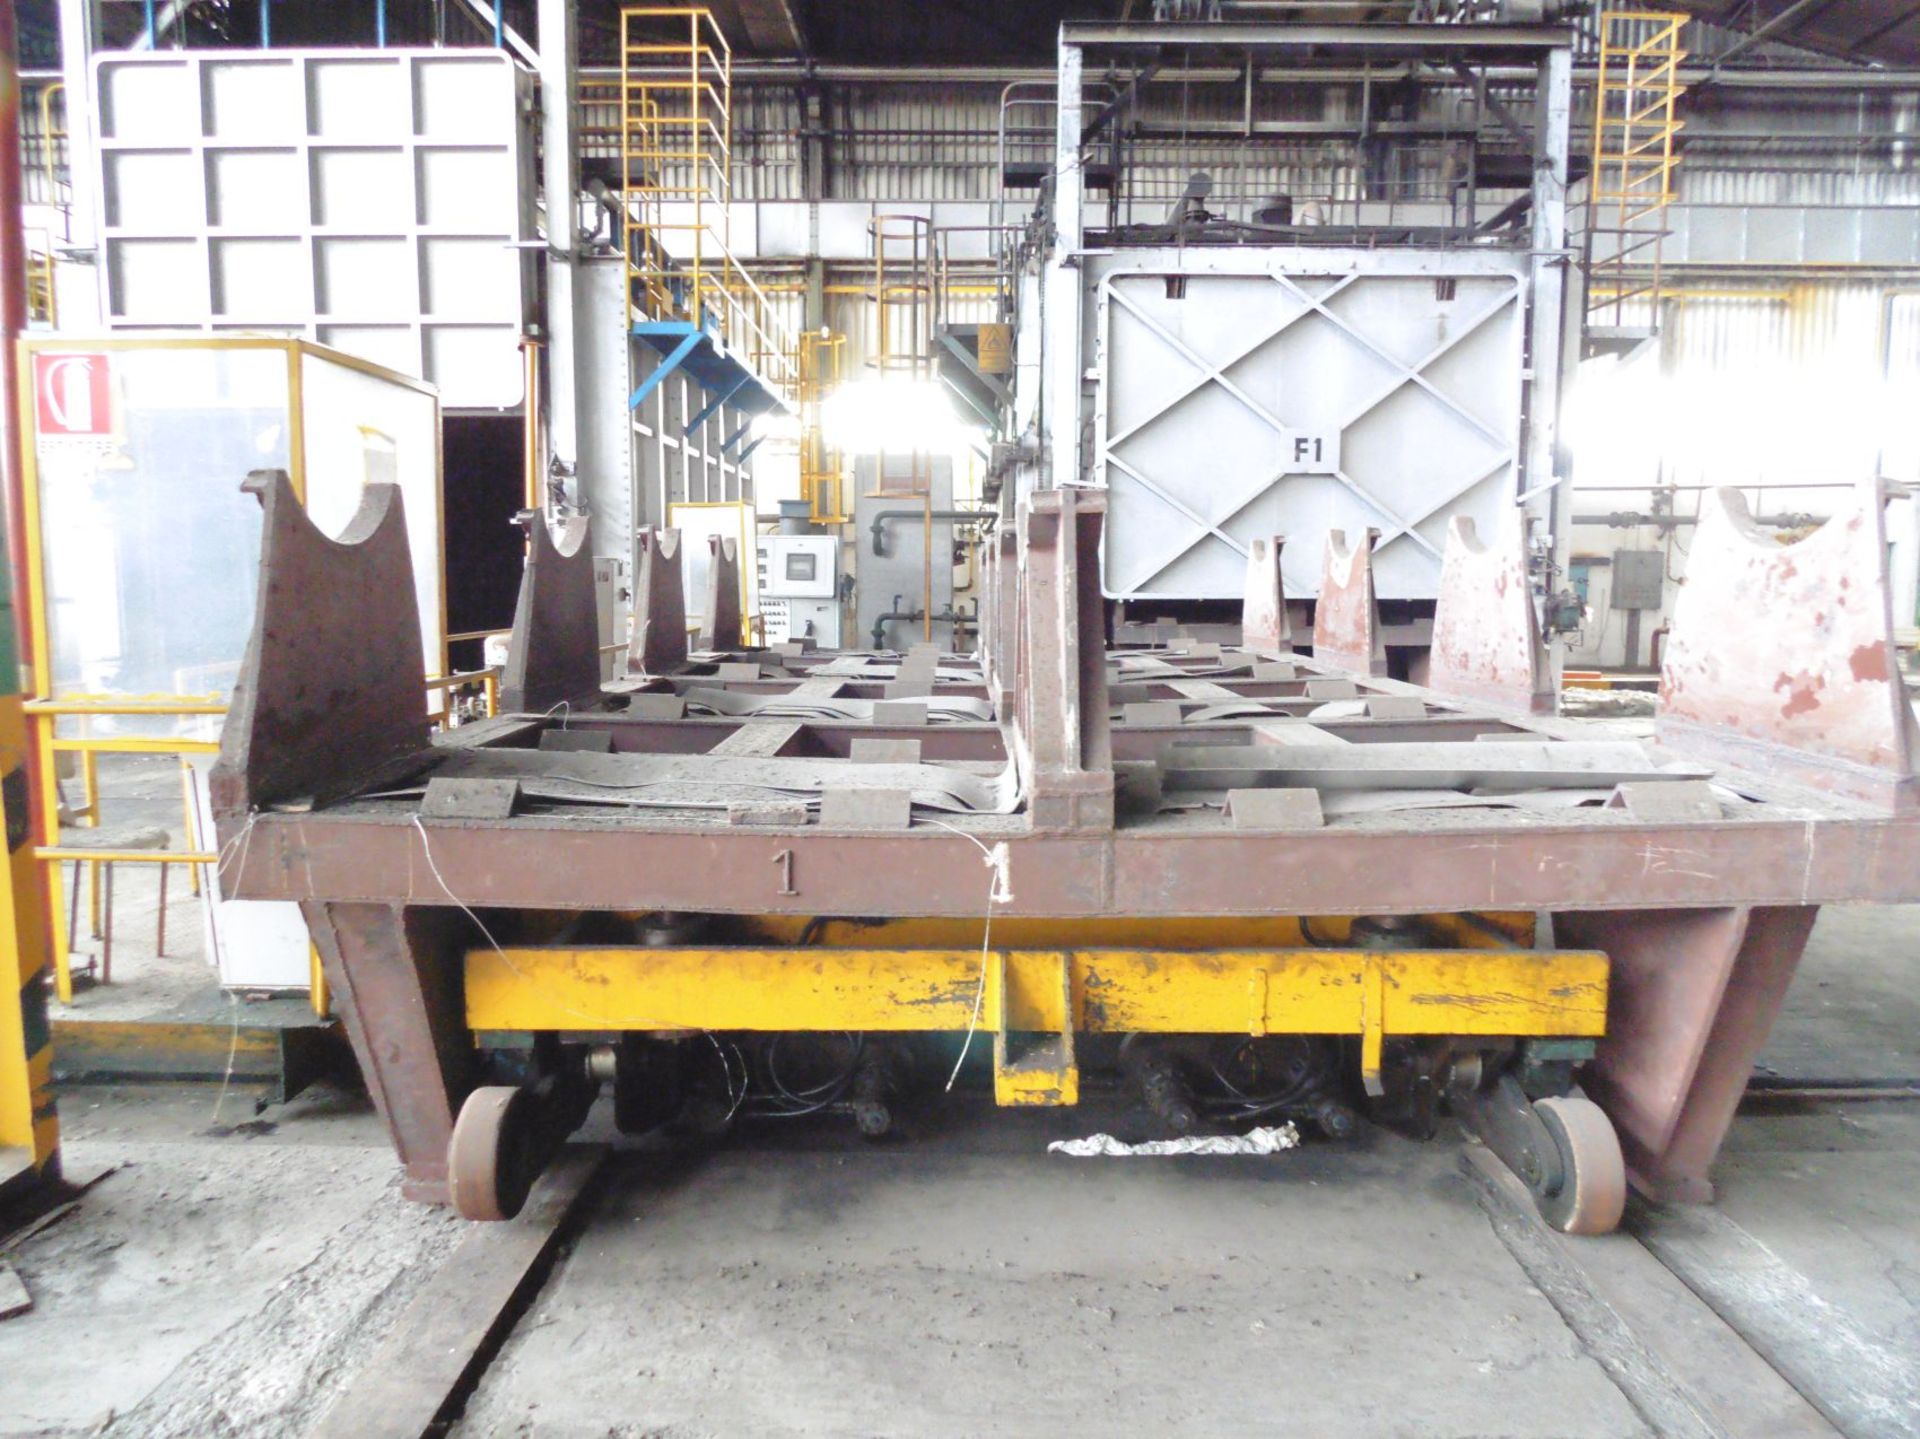 Rail Mounted Furnace Loading Car/Manipulator with 5 x Four - Stand Frames for Coil Loading (used for - Image 5 of 11